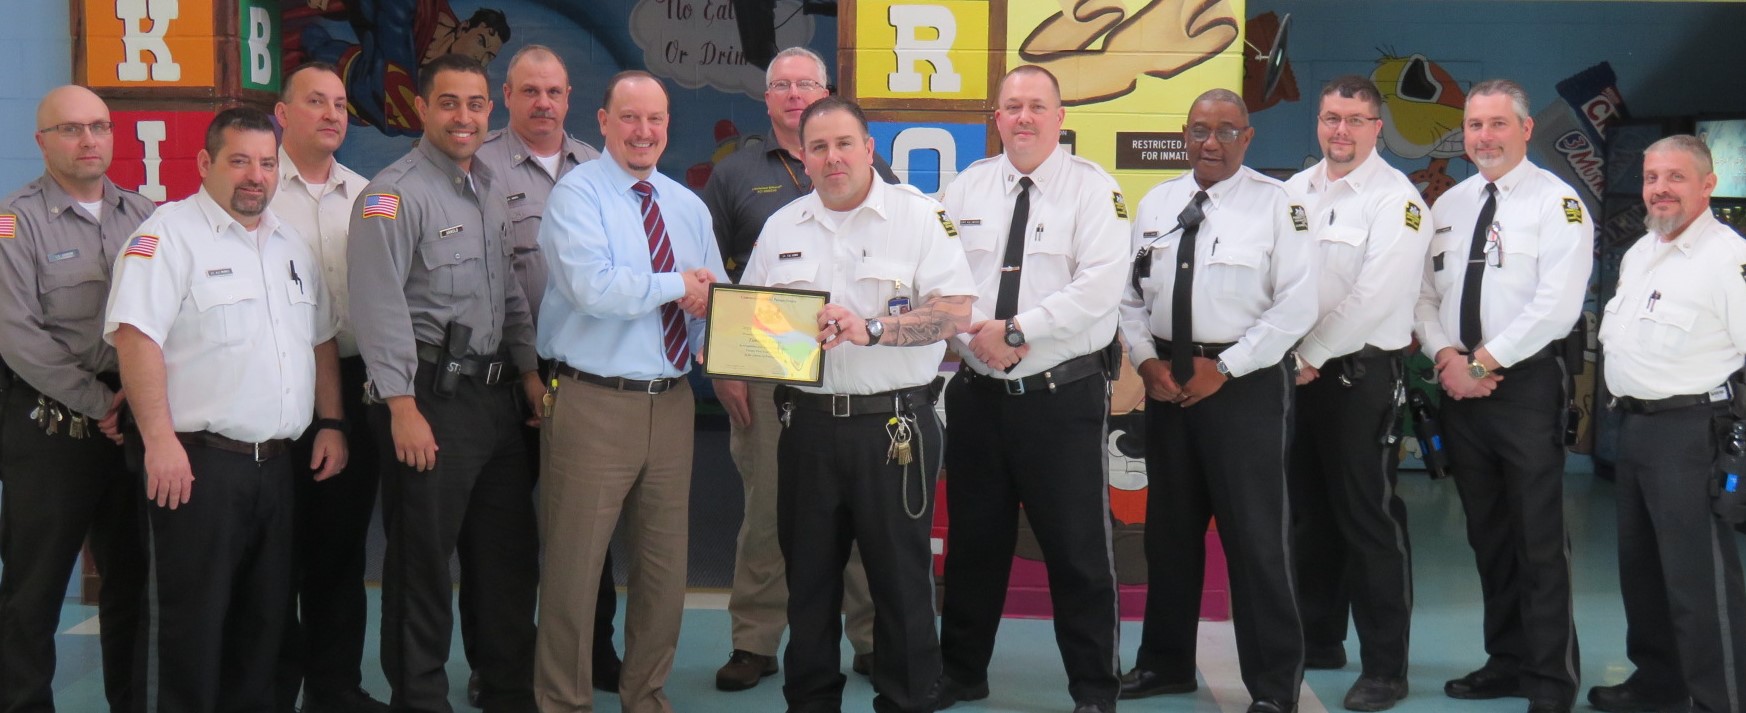 Lieutenant Tim Lewis with colleagues and his retirement certificate